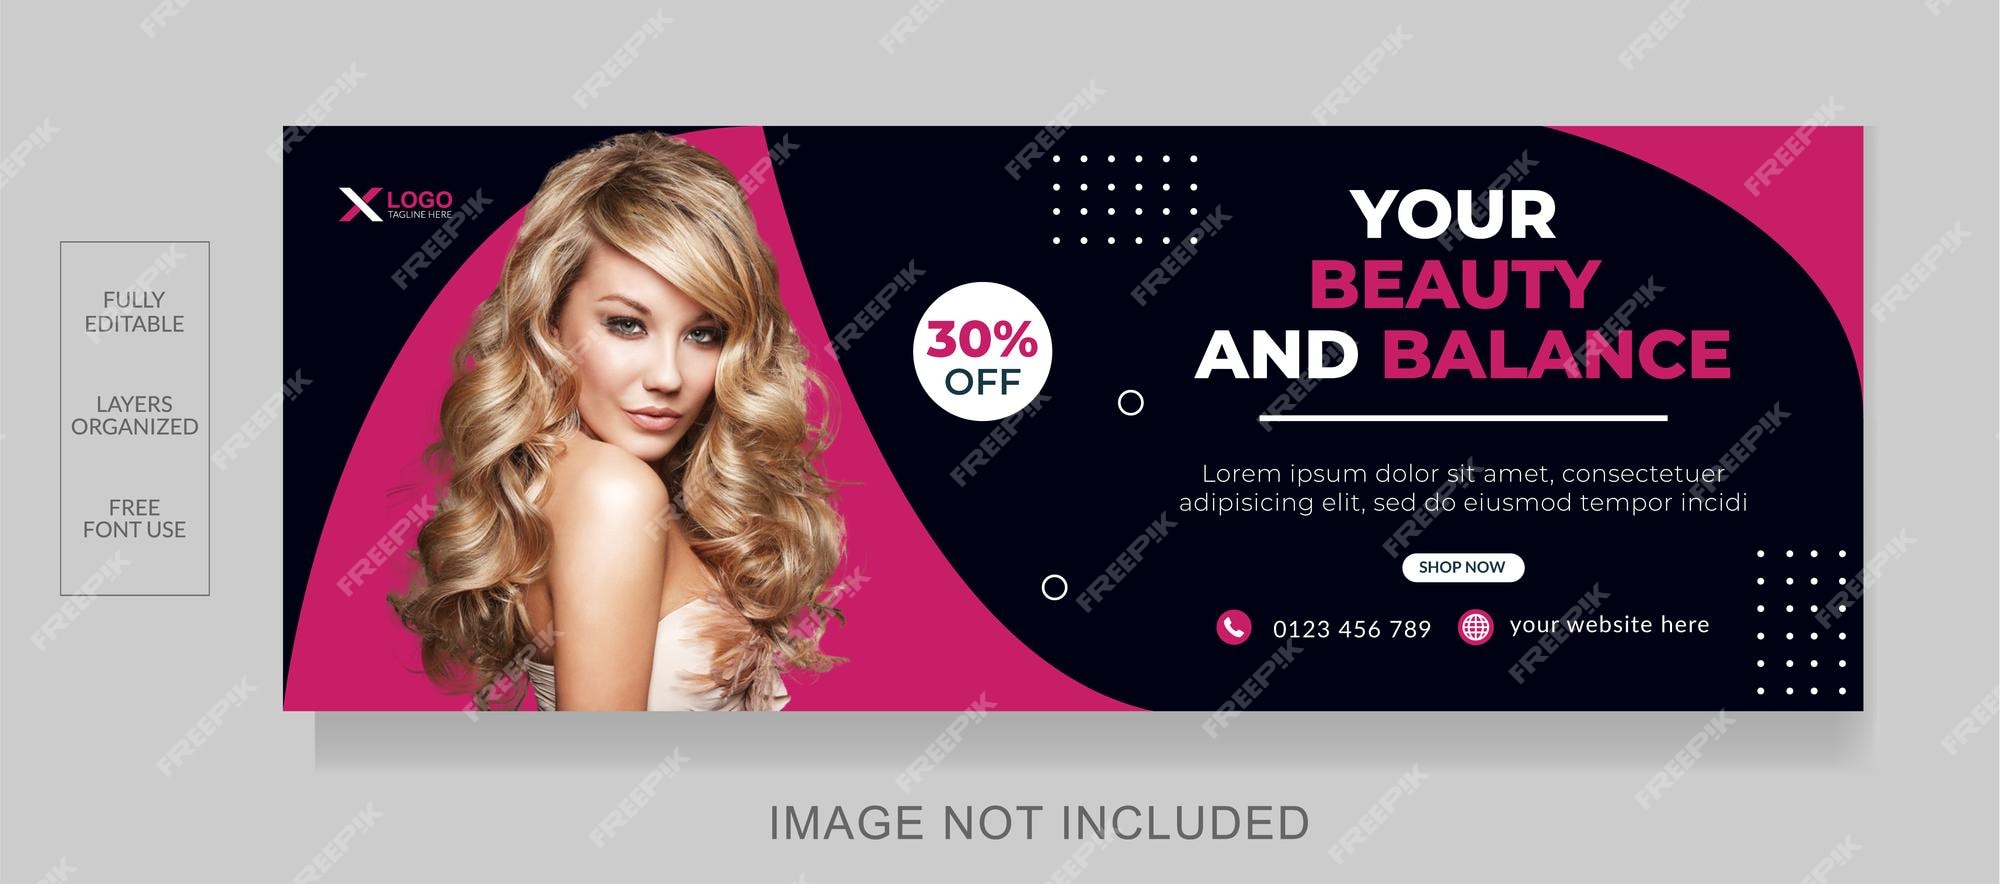 Page 12 | Hair post Vectors & Illustrations for Free Download | Freepik